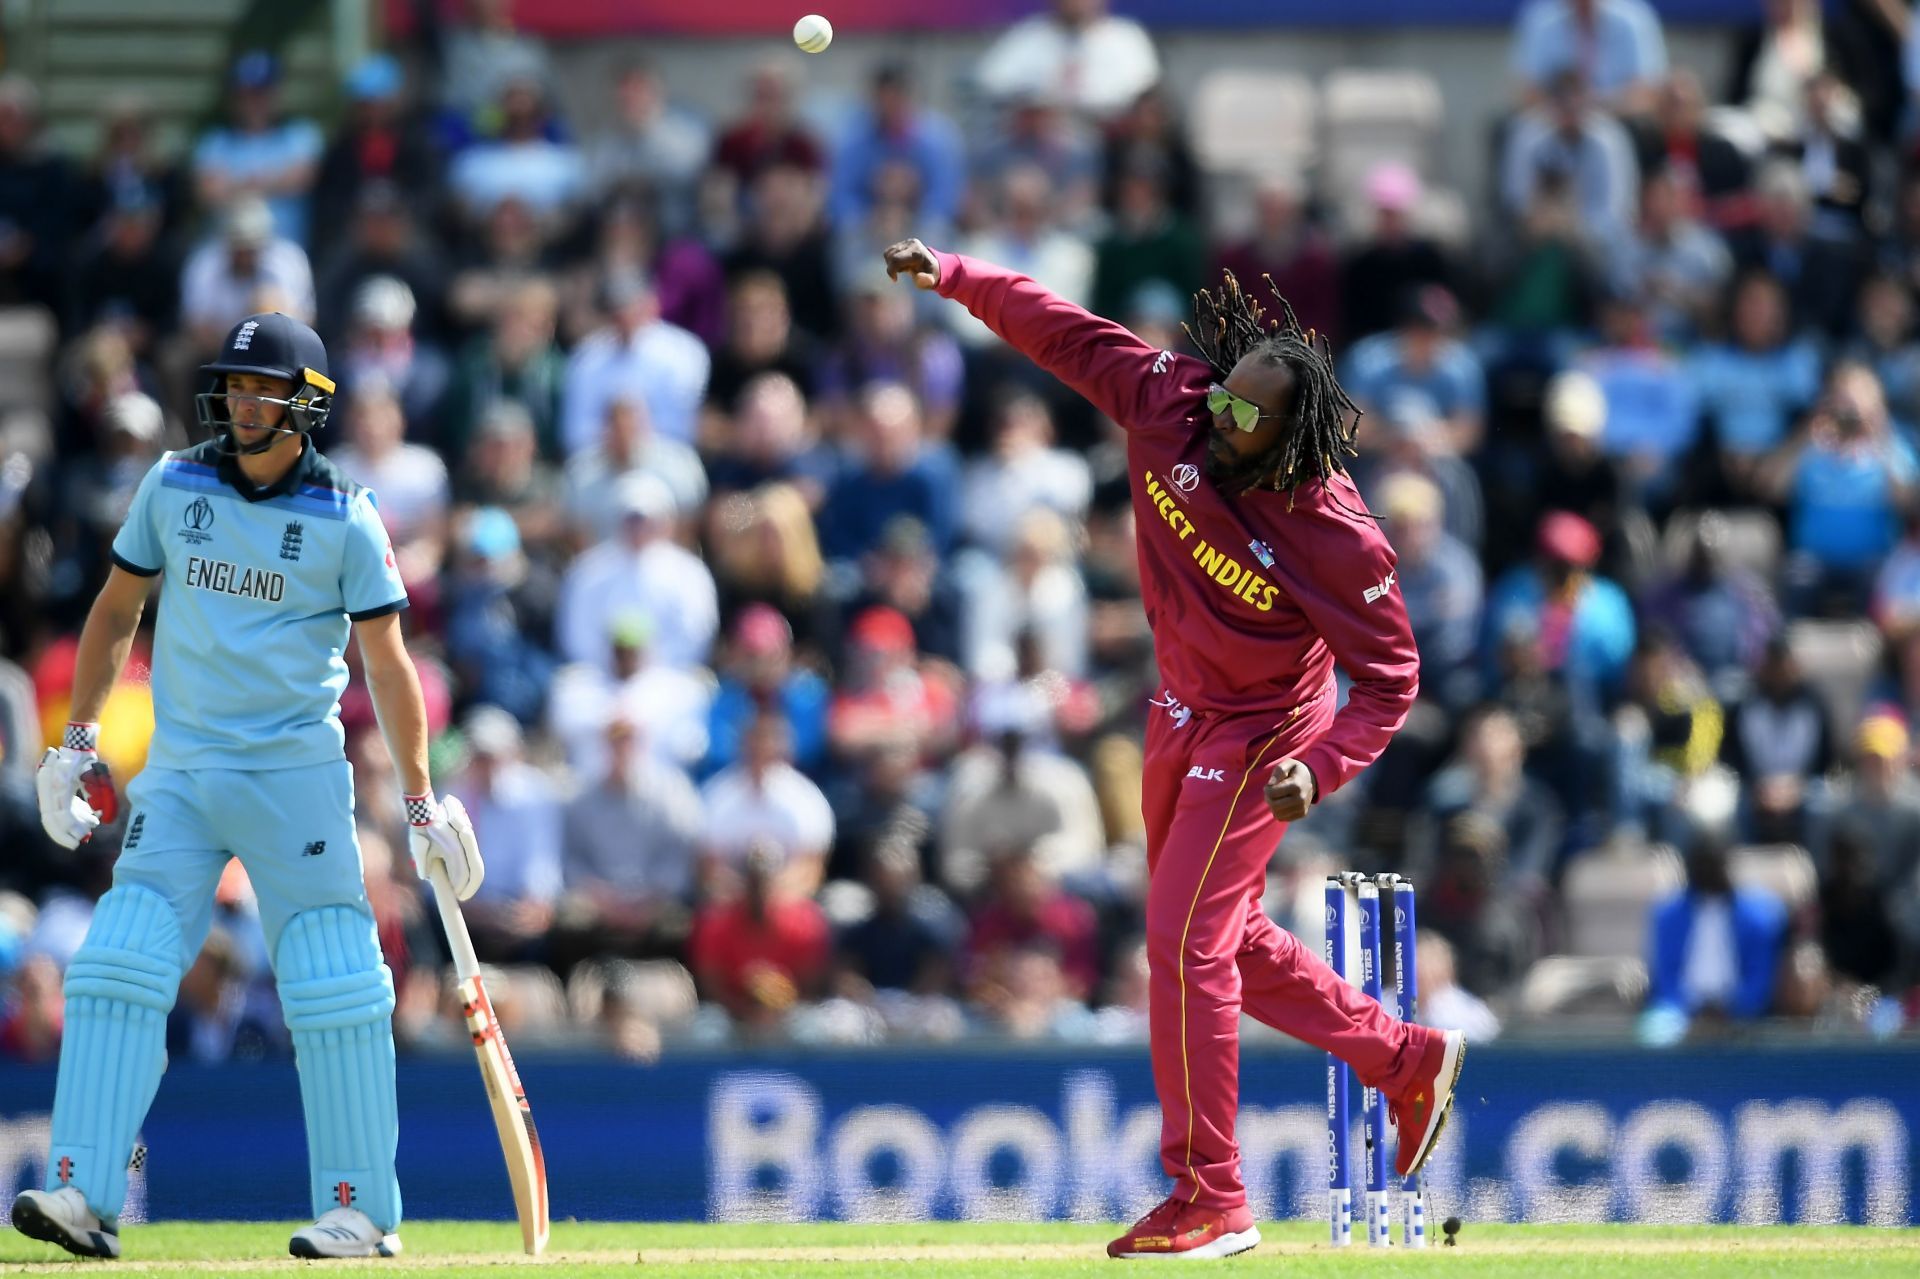 Chris Gayle can be a game-changer for the West Indies in their T20 World Cup match against England